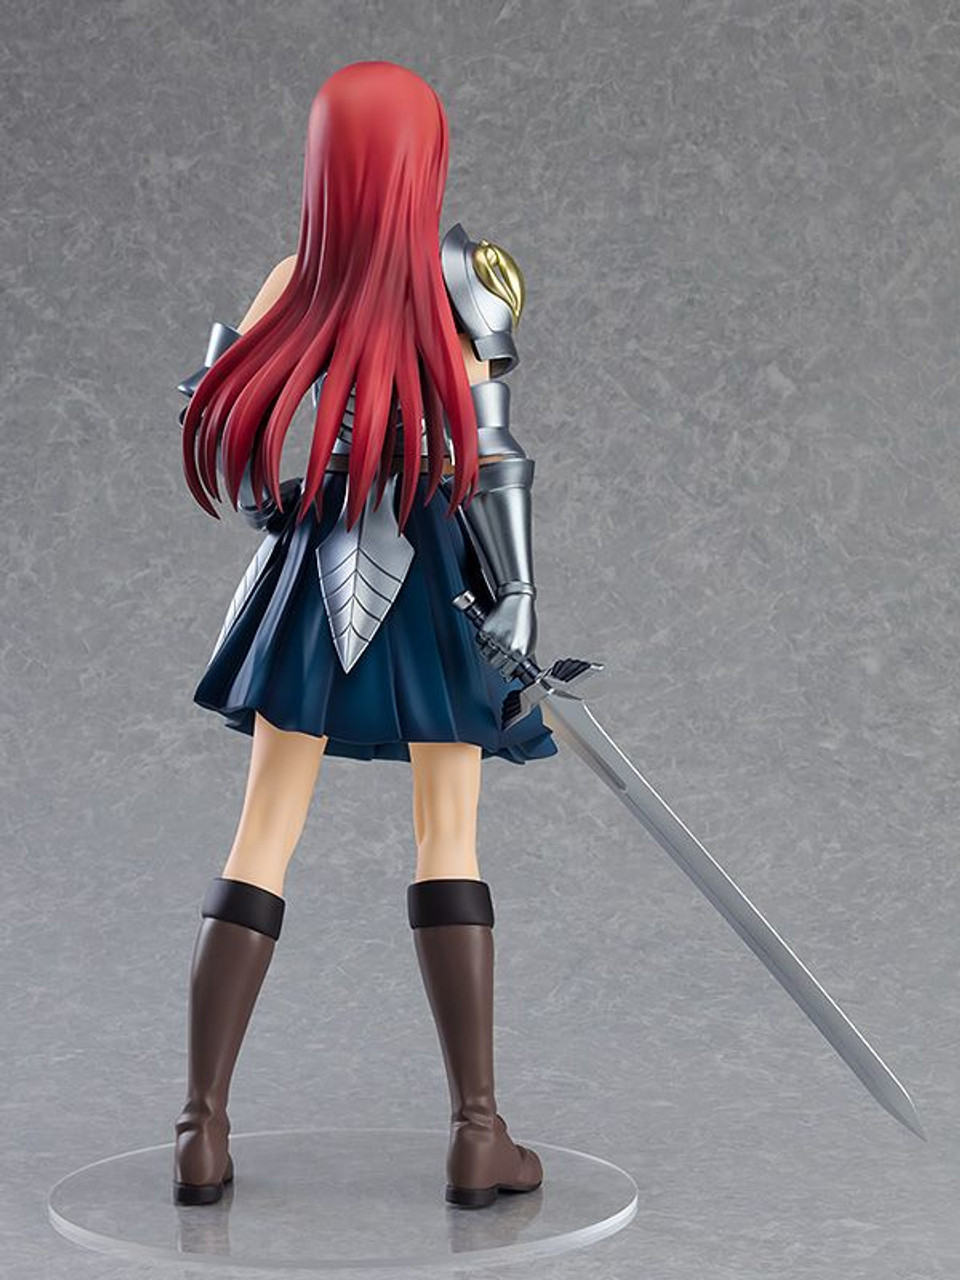 POP UP PARADE Erza Scarlet XL Figure (FAIRY TAIL)